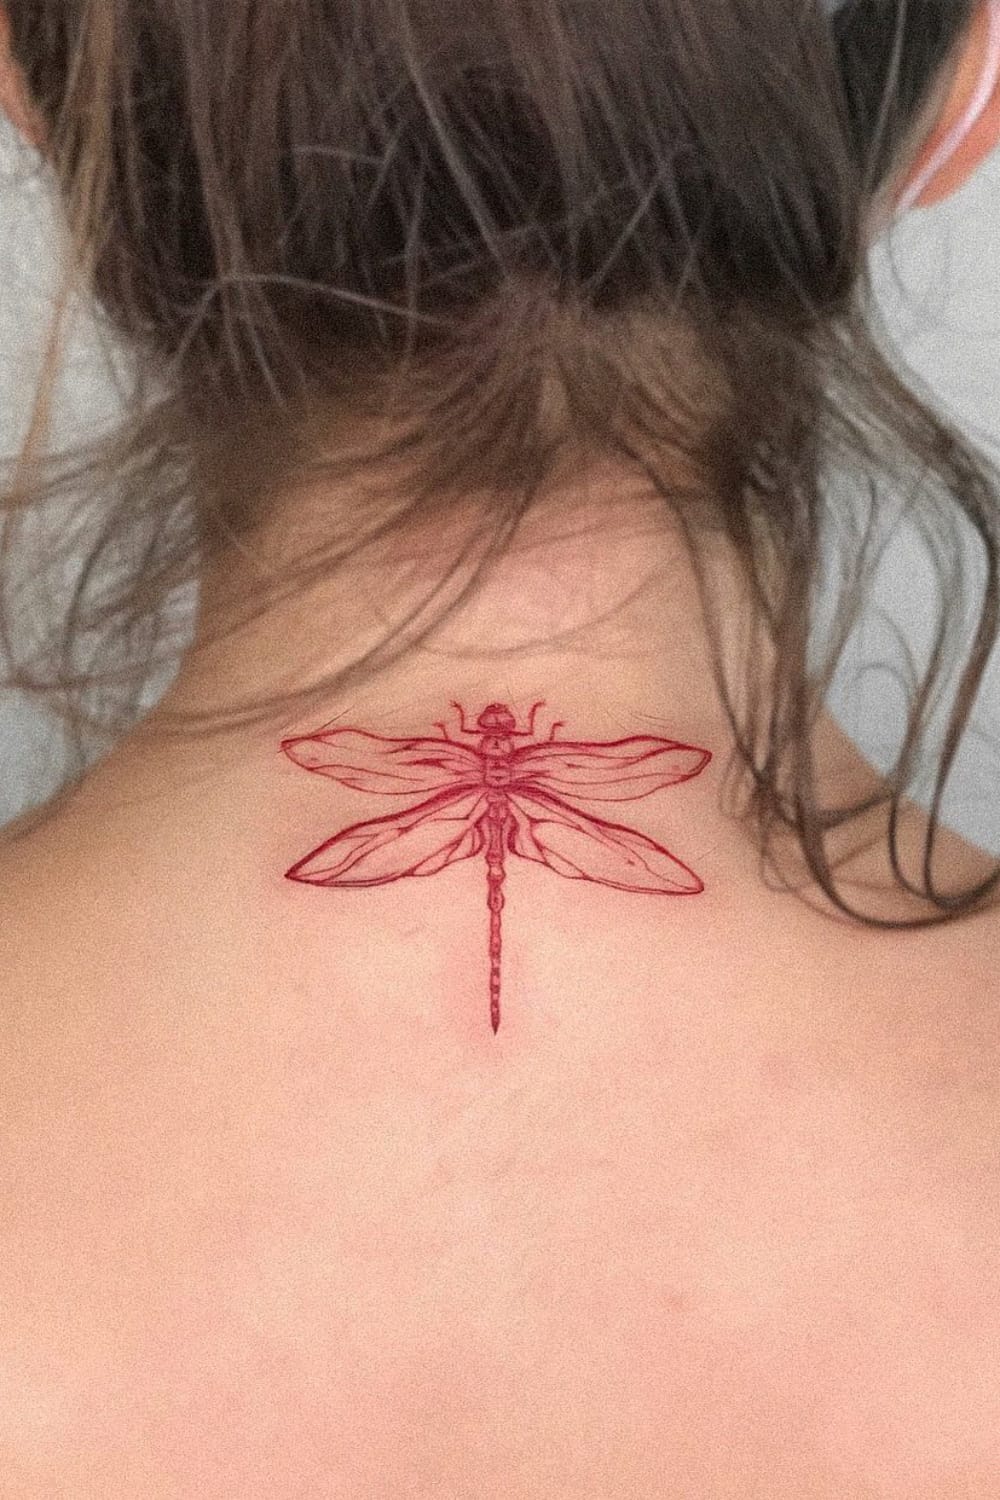 Red Dragonfly Tattoo